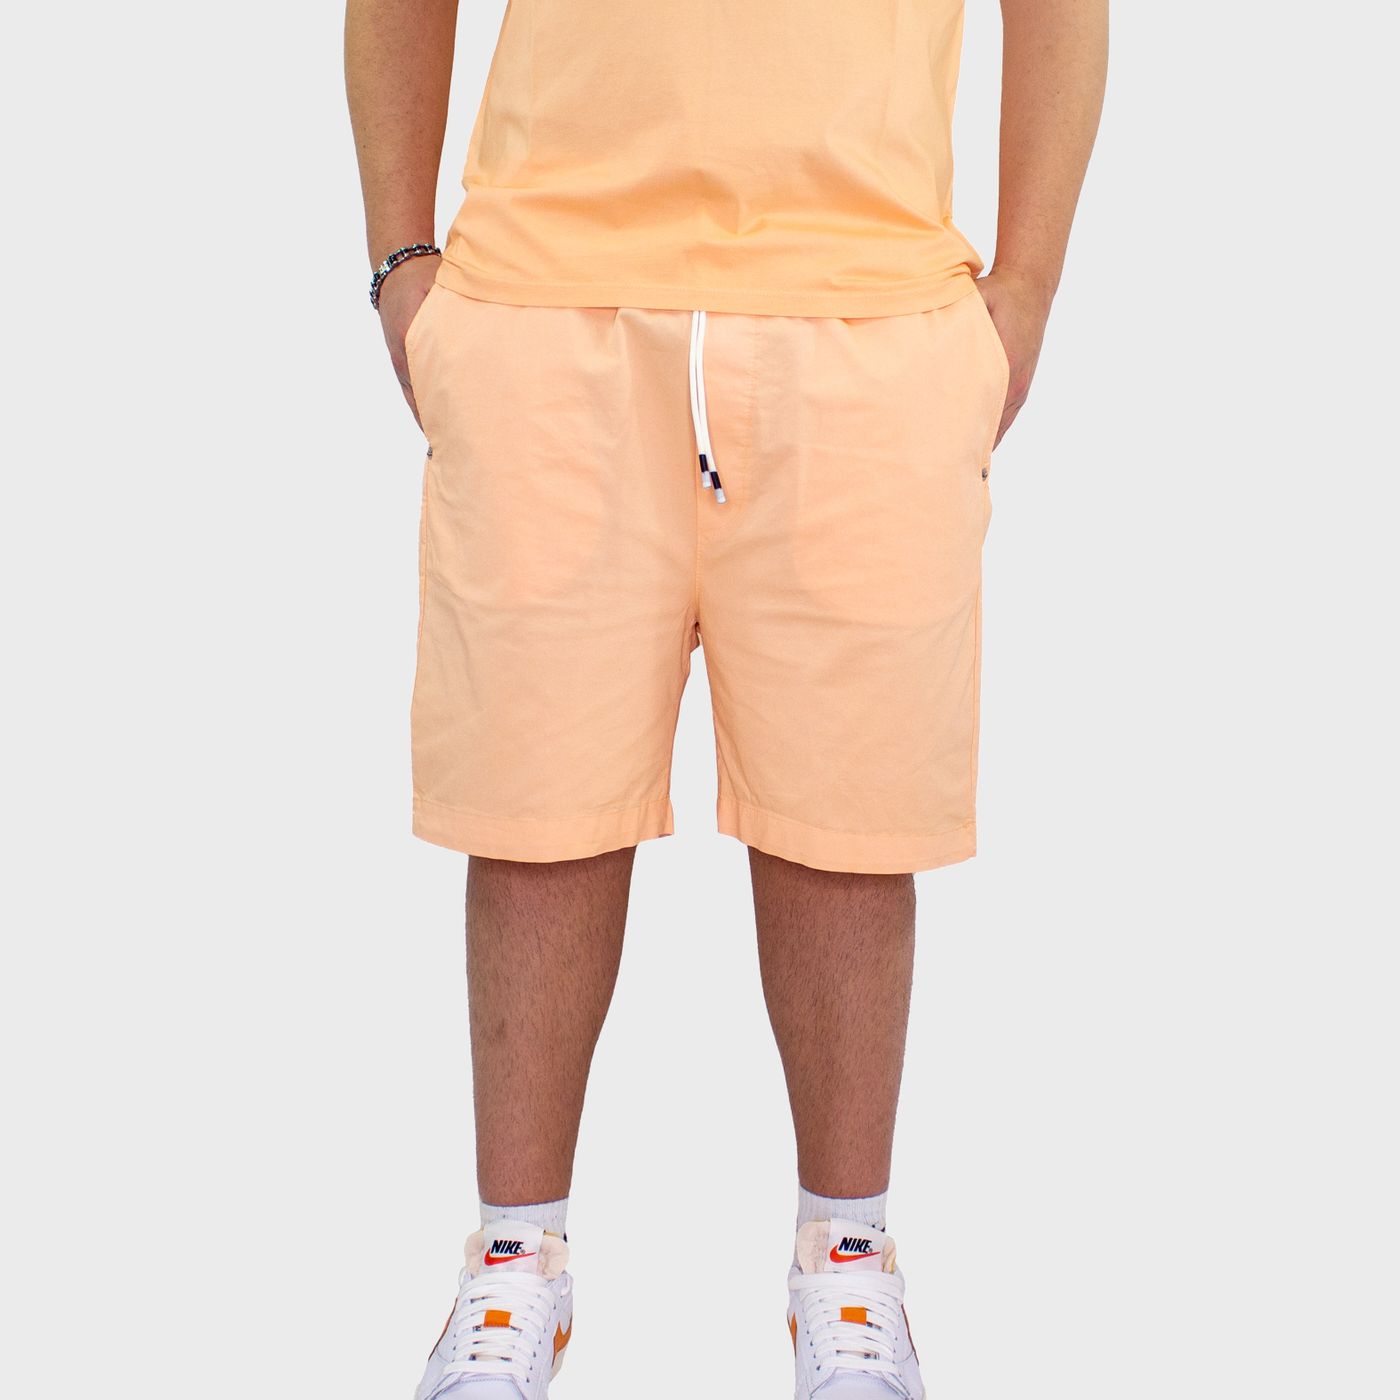 BR / 00502 - Shorts - WHITE OVER